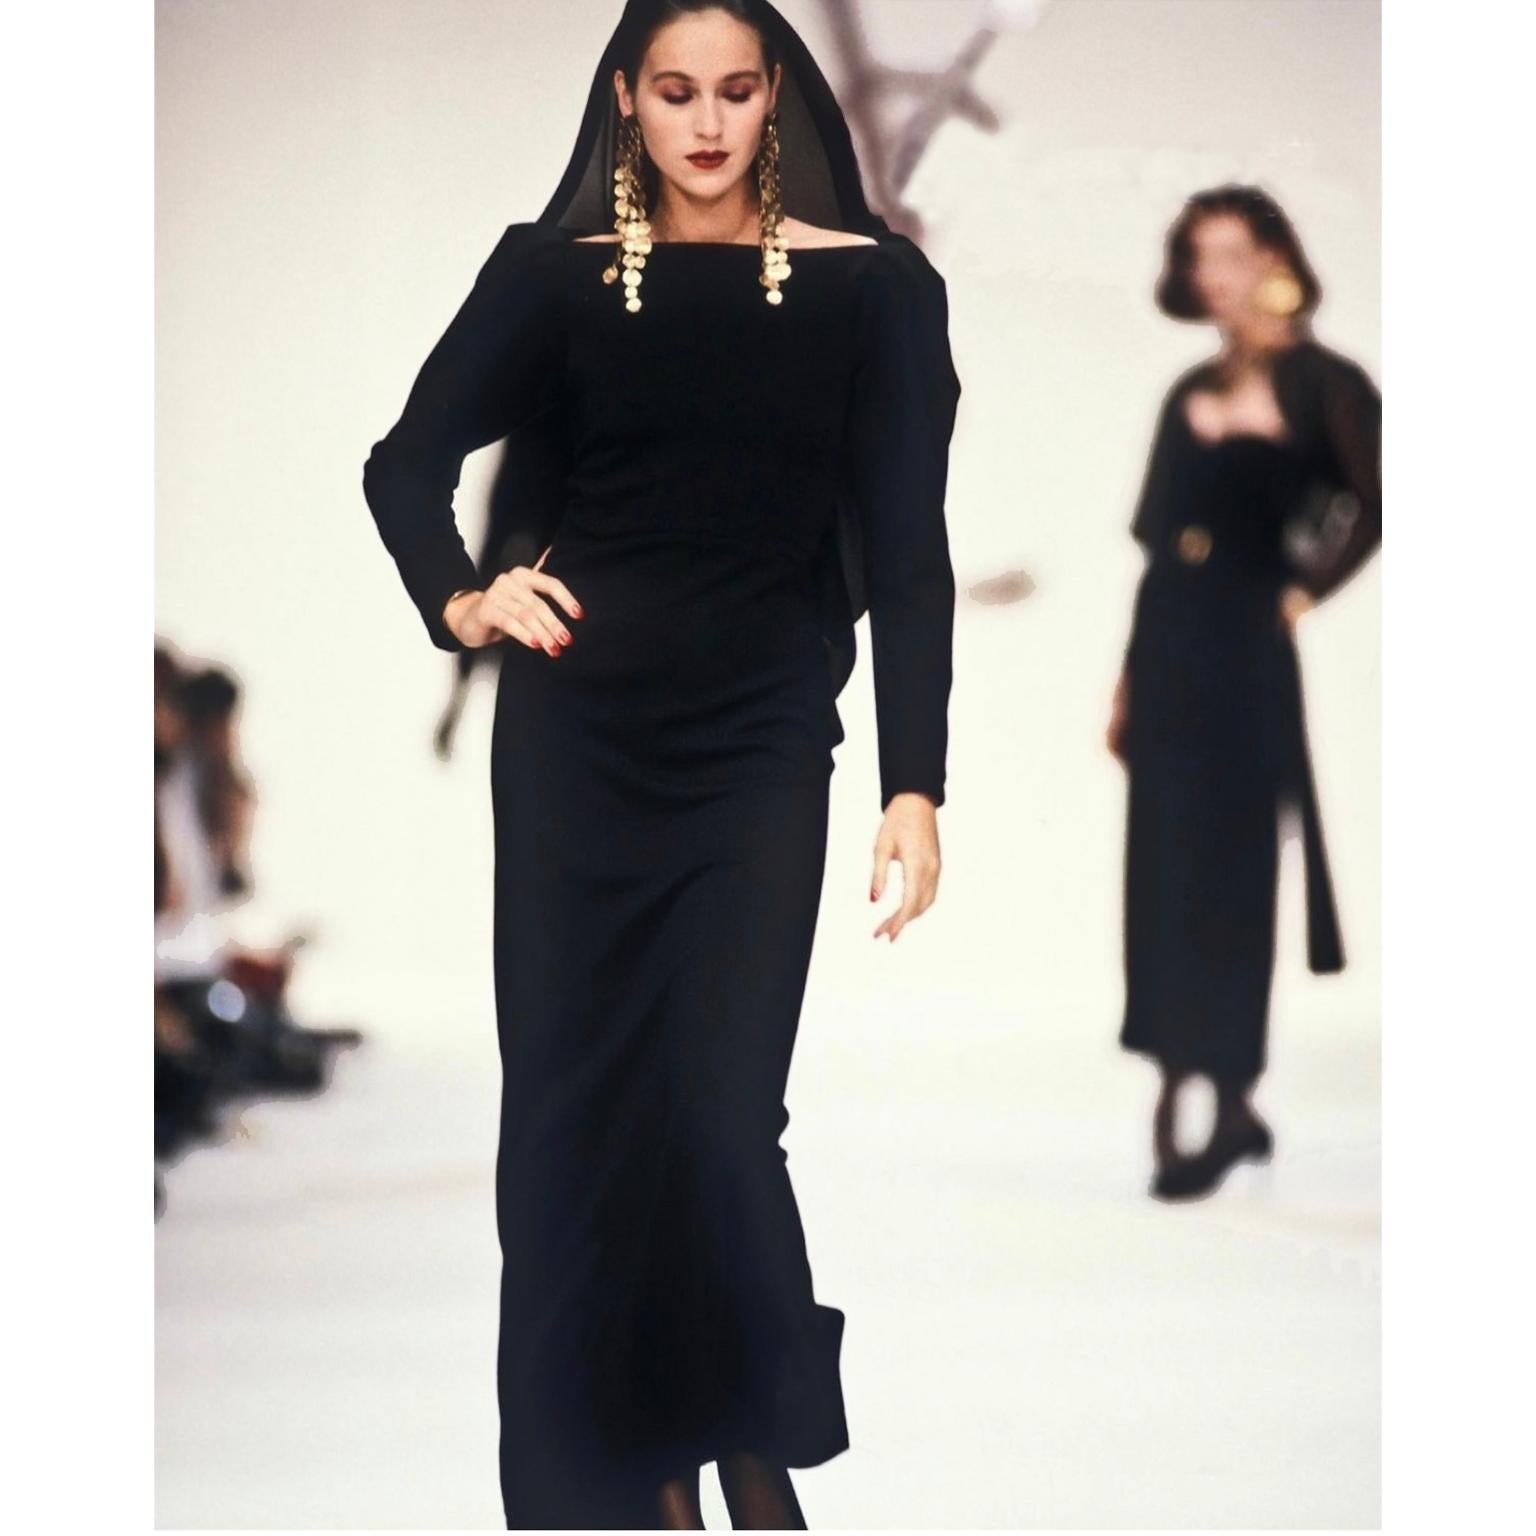 This absolutely stunning Yves Saint Laurent long black wool evening gown was featured on the YSL Fall Winter 1990/91 runway. We fell in love with this incredible dress and were are so happy to be able to include it in our YSL collection! Yves Saint